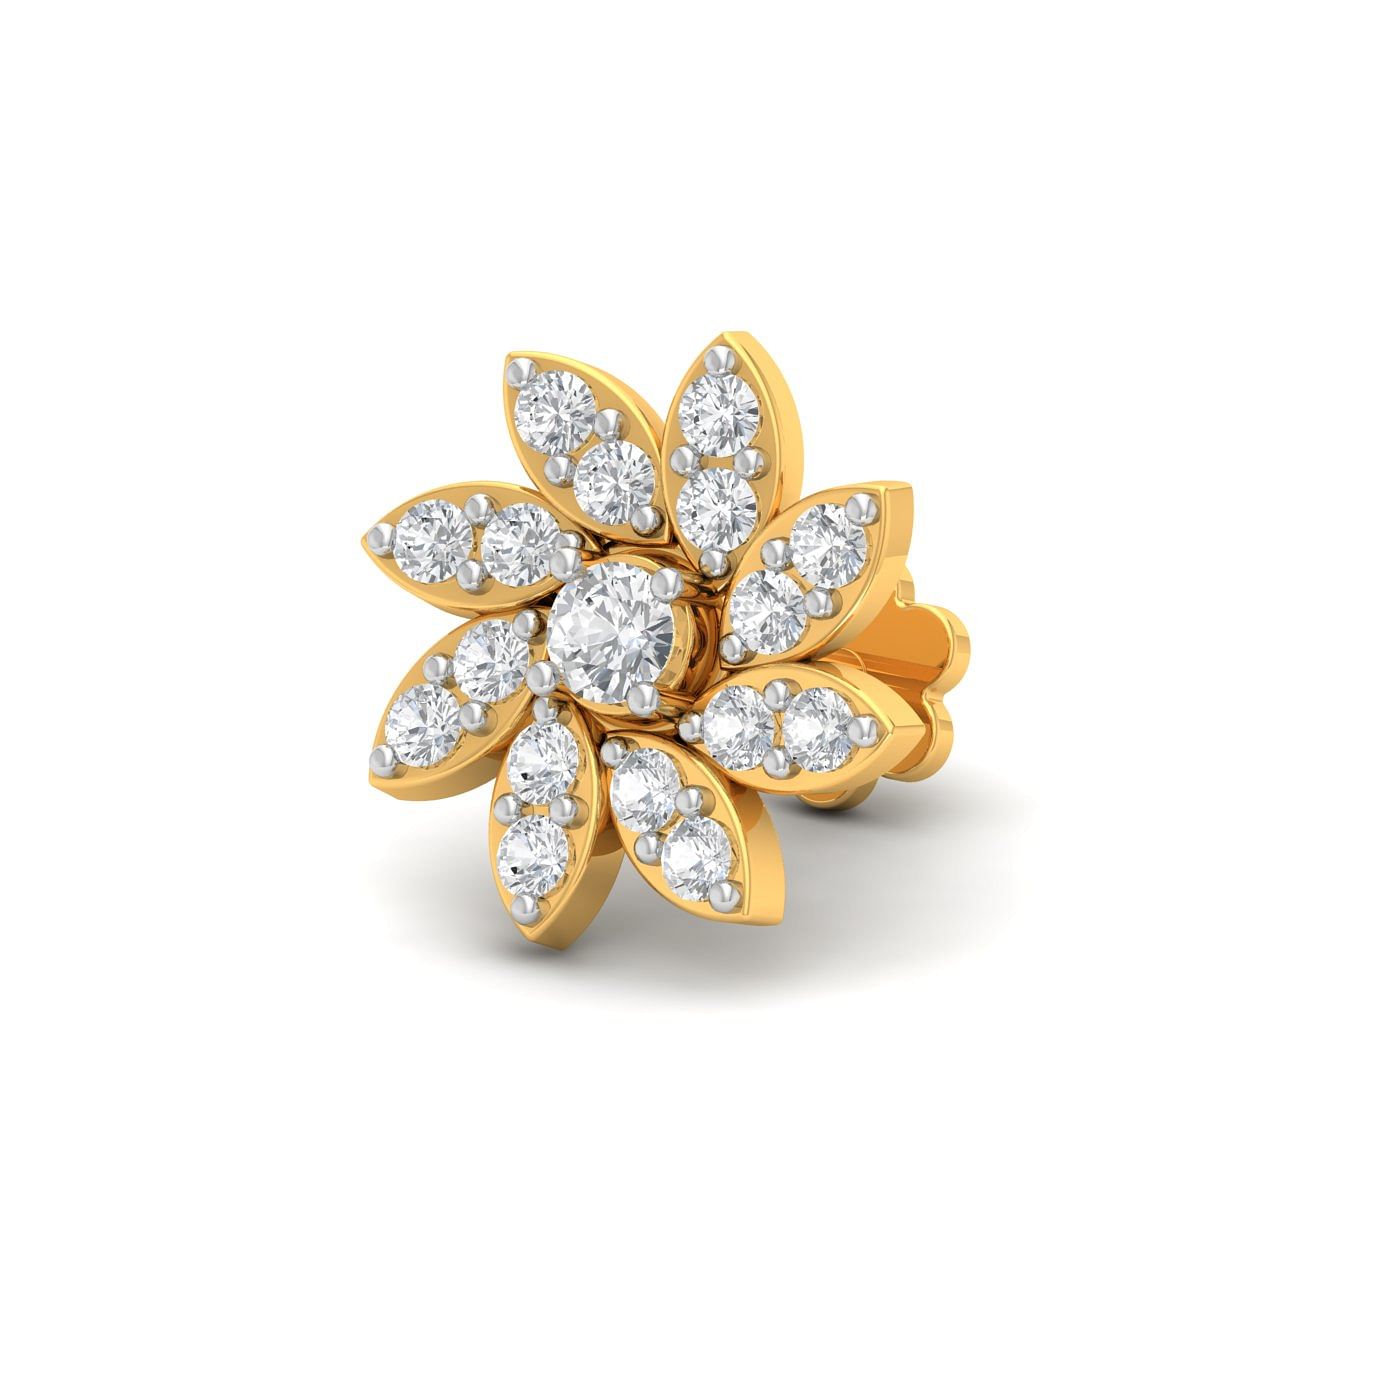 Flower design Rudrama Diamond Nose Pin with yellow gold